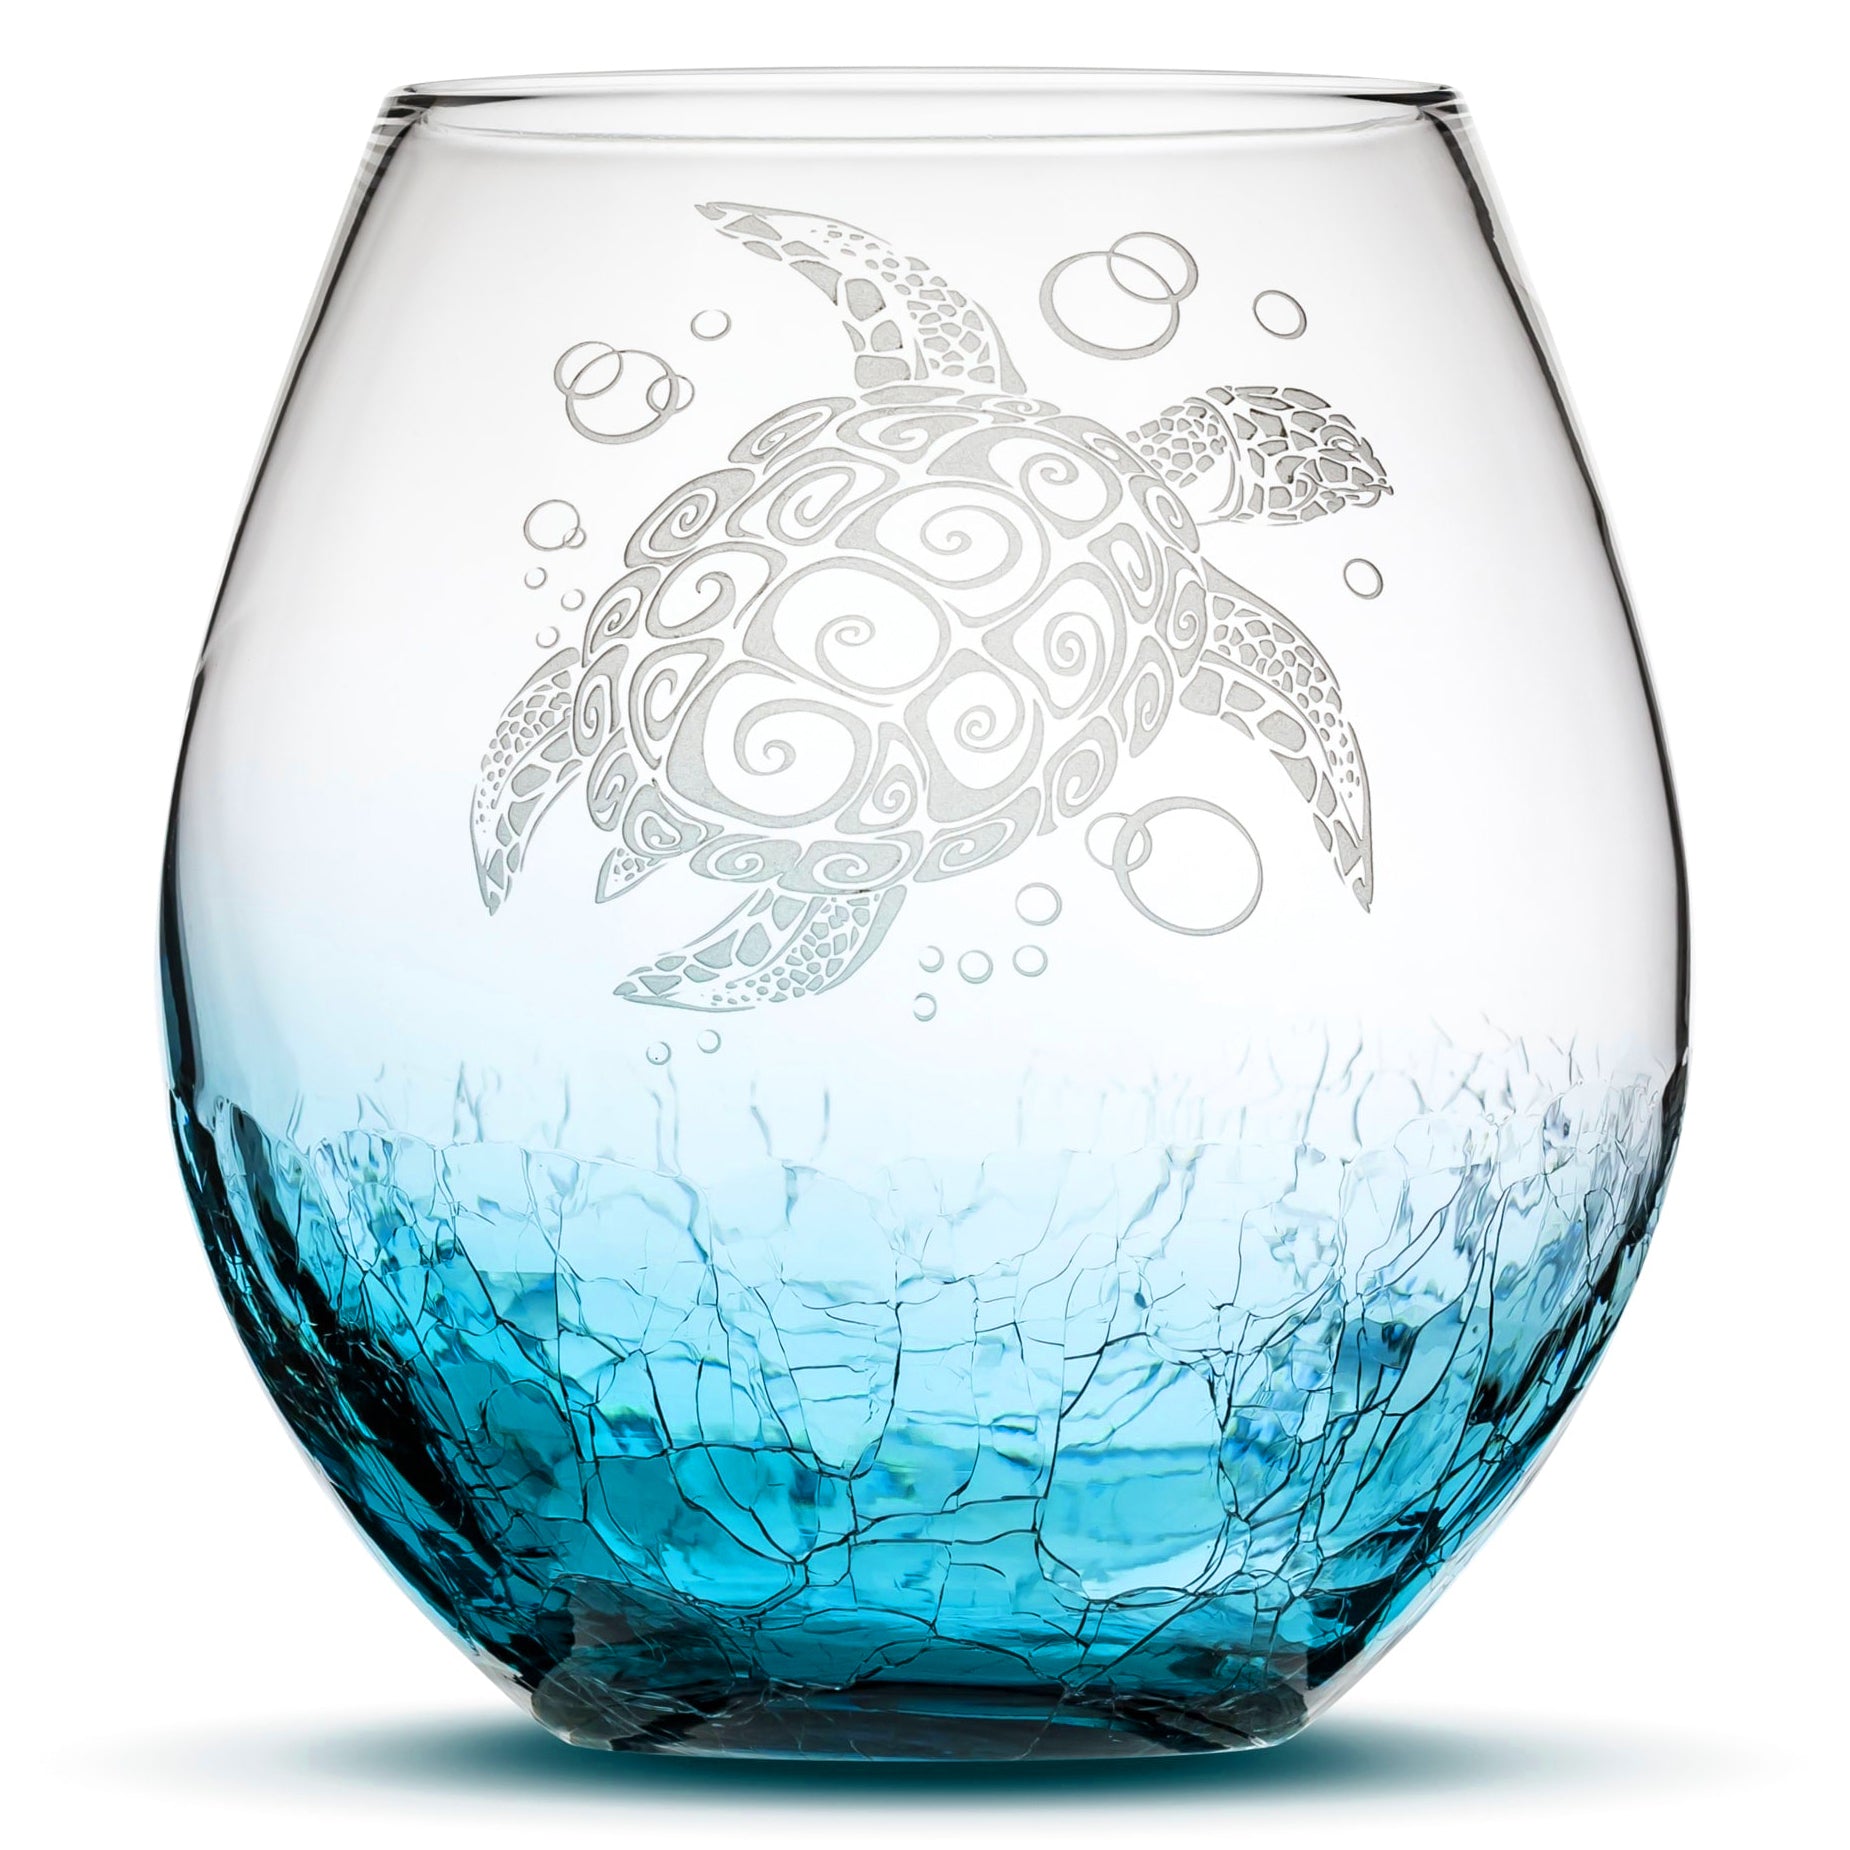 Less Than Perfect Discounted Crackle Wine Glass, Sea Turtle Design, Laser Etched or Hand Etched, 18oz